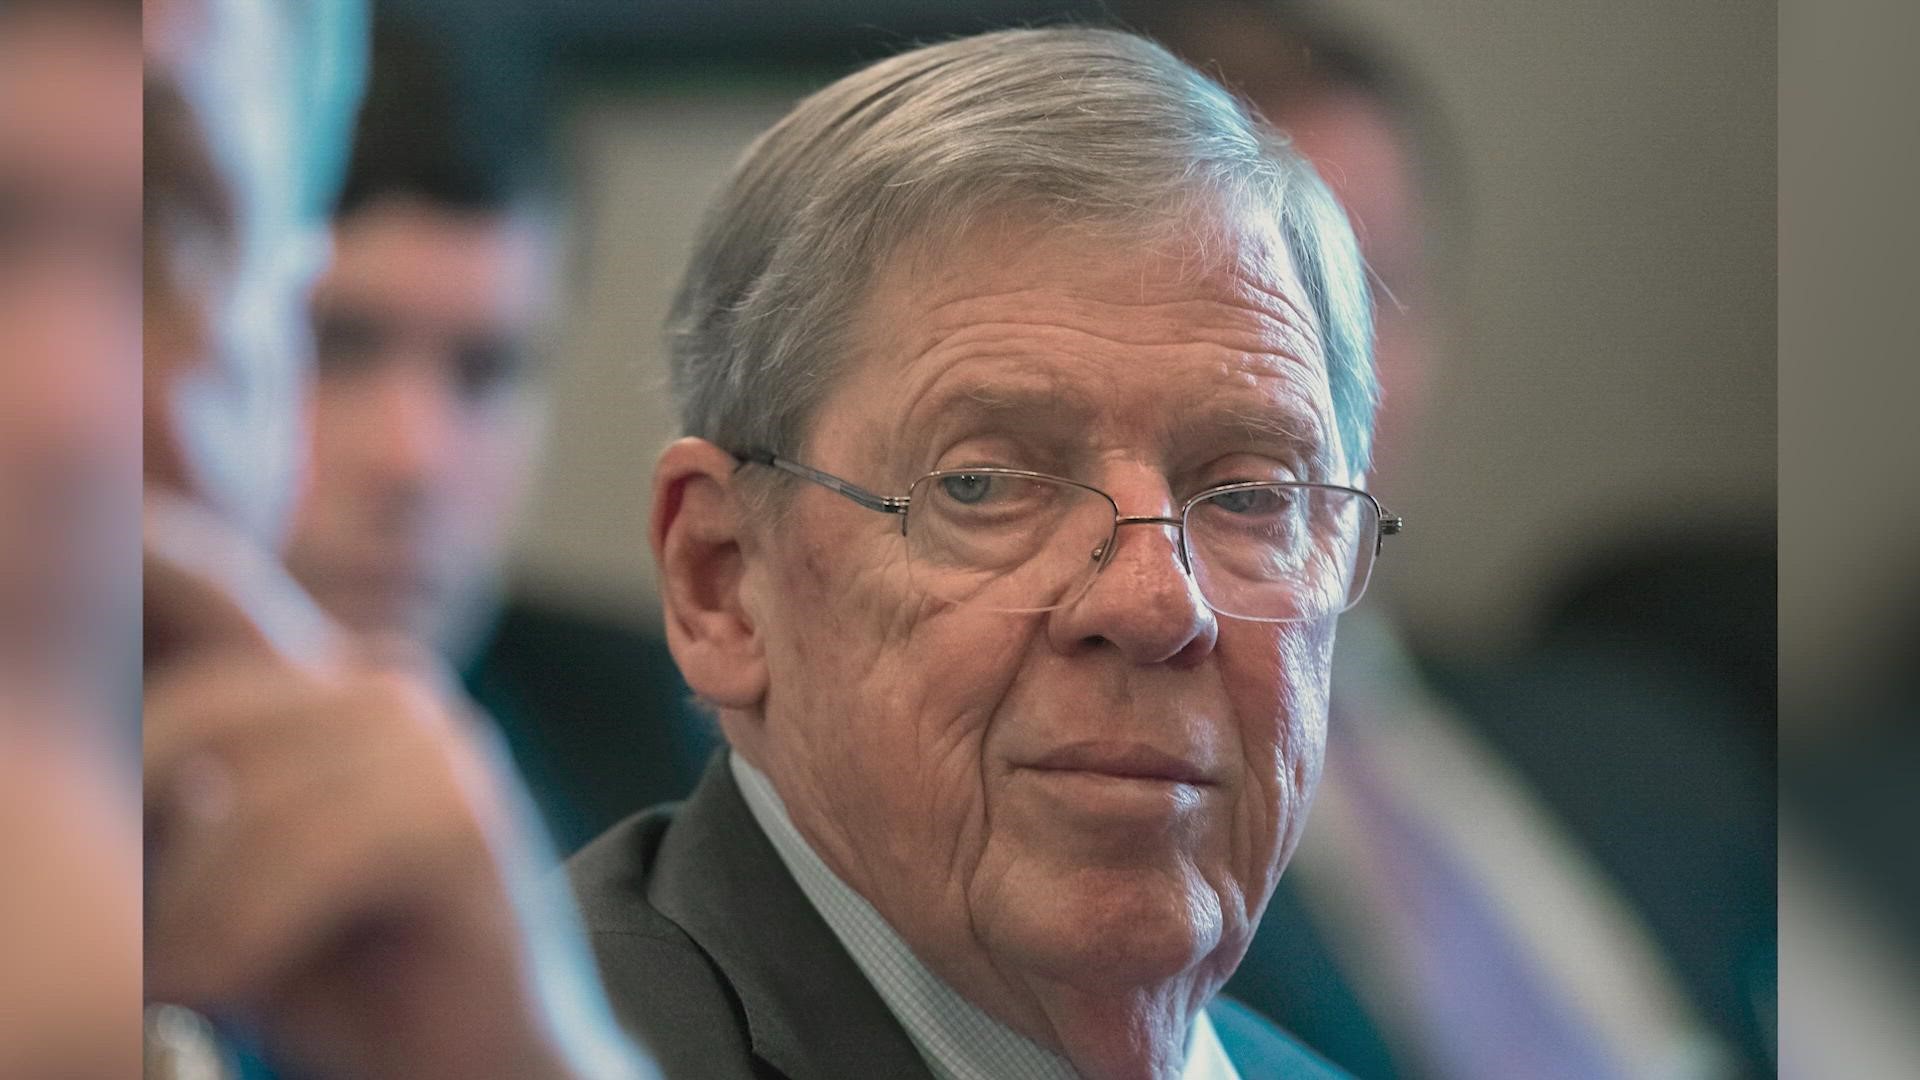 Georgia Republican Johnny Isakson embodied an old-school kind of congenial politics and served the state in the U.S. Senate for nearly 15 years.